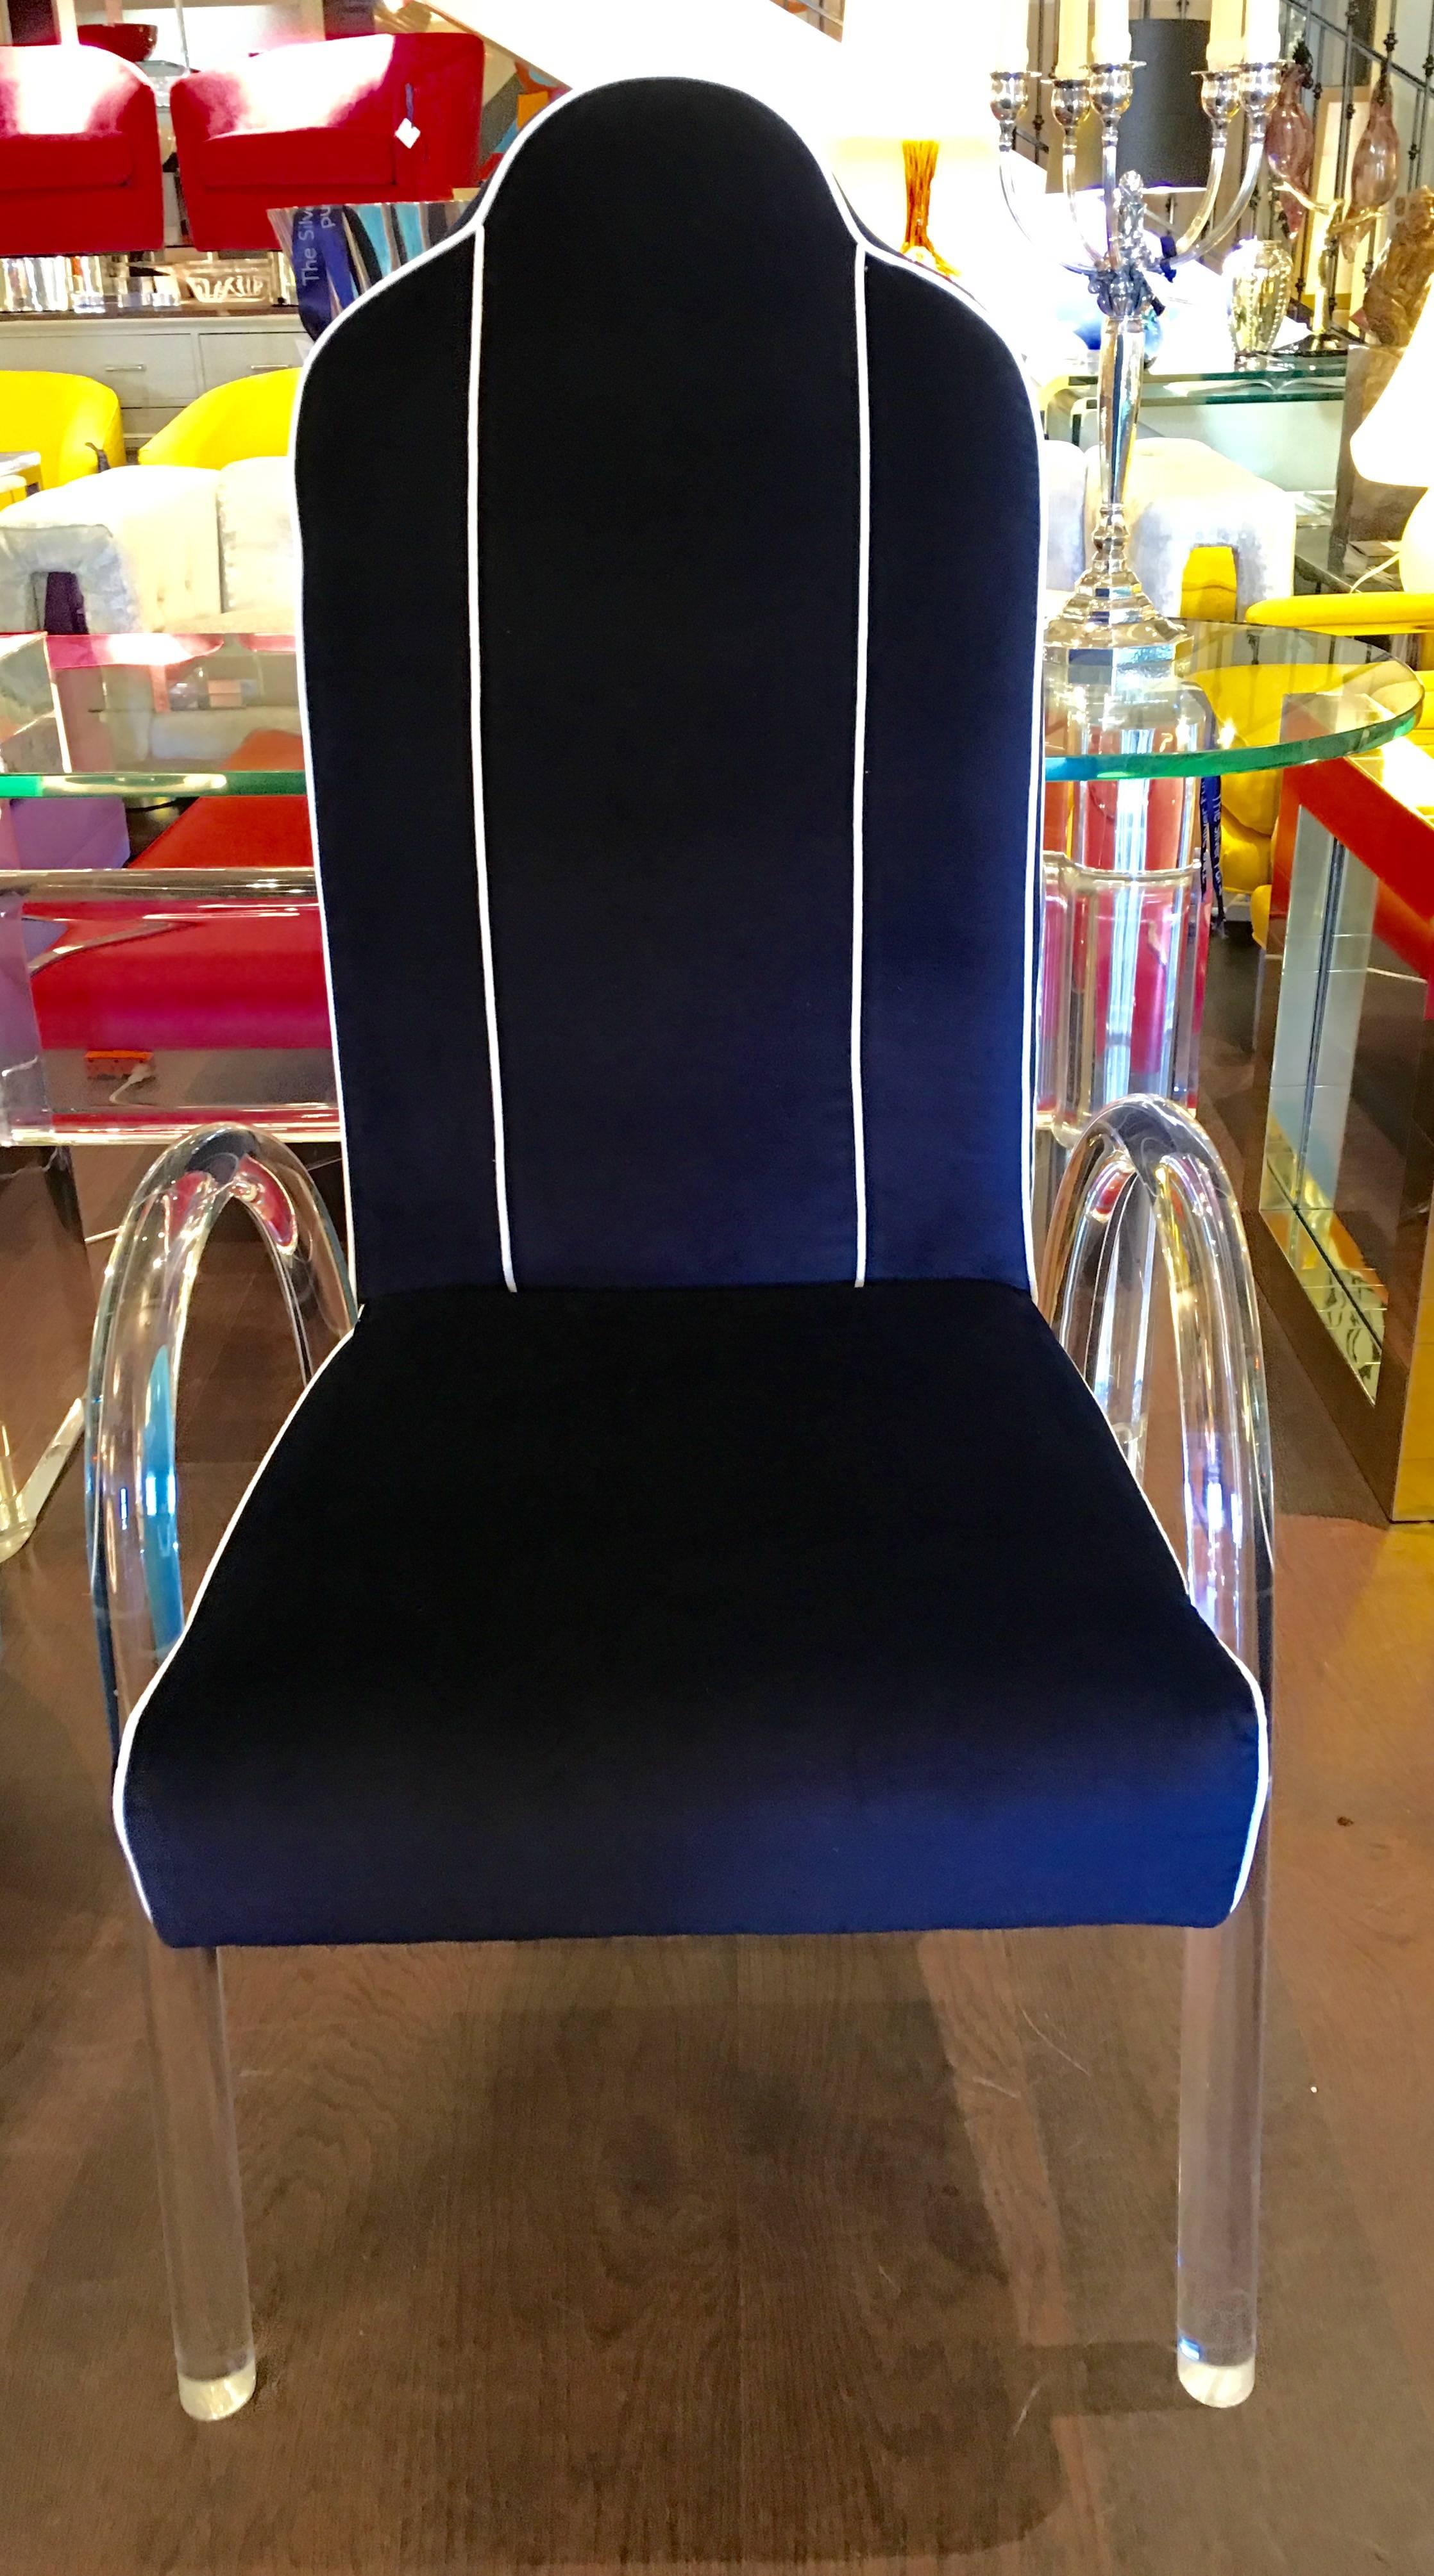 A set of six dining chairs by Charles Hollis Jones, produced circa 1970s, with frames and curved waterfall legs in Lucite, newly upholstered in dark blue velvet fabric with white piping. They show like new.